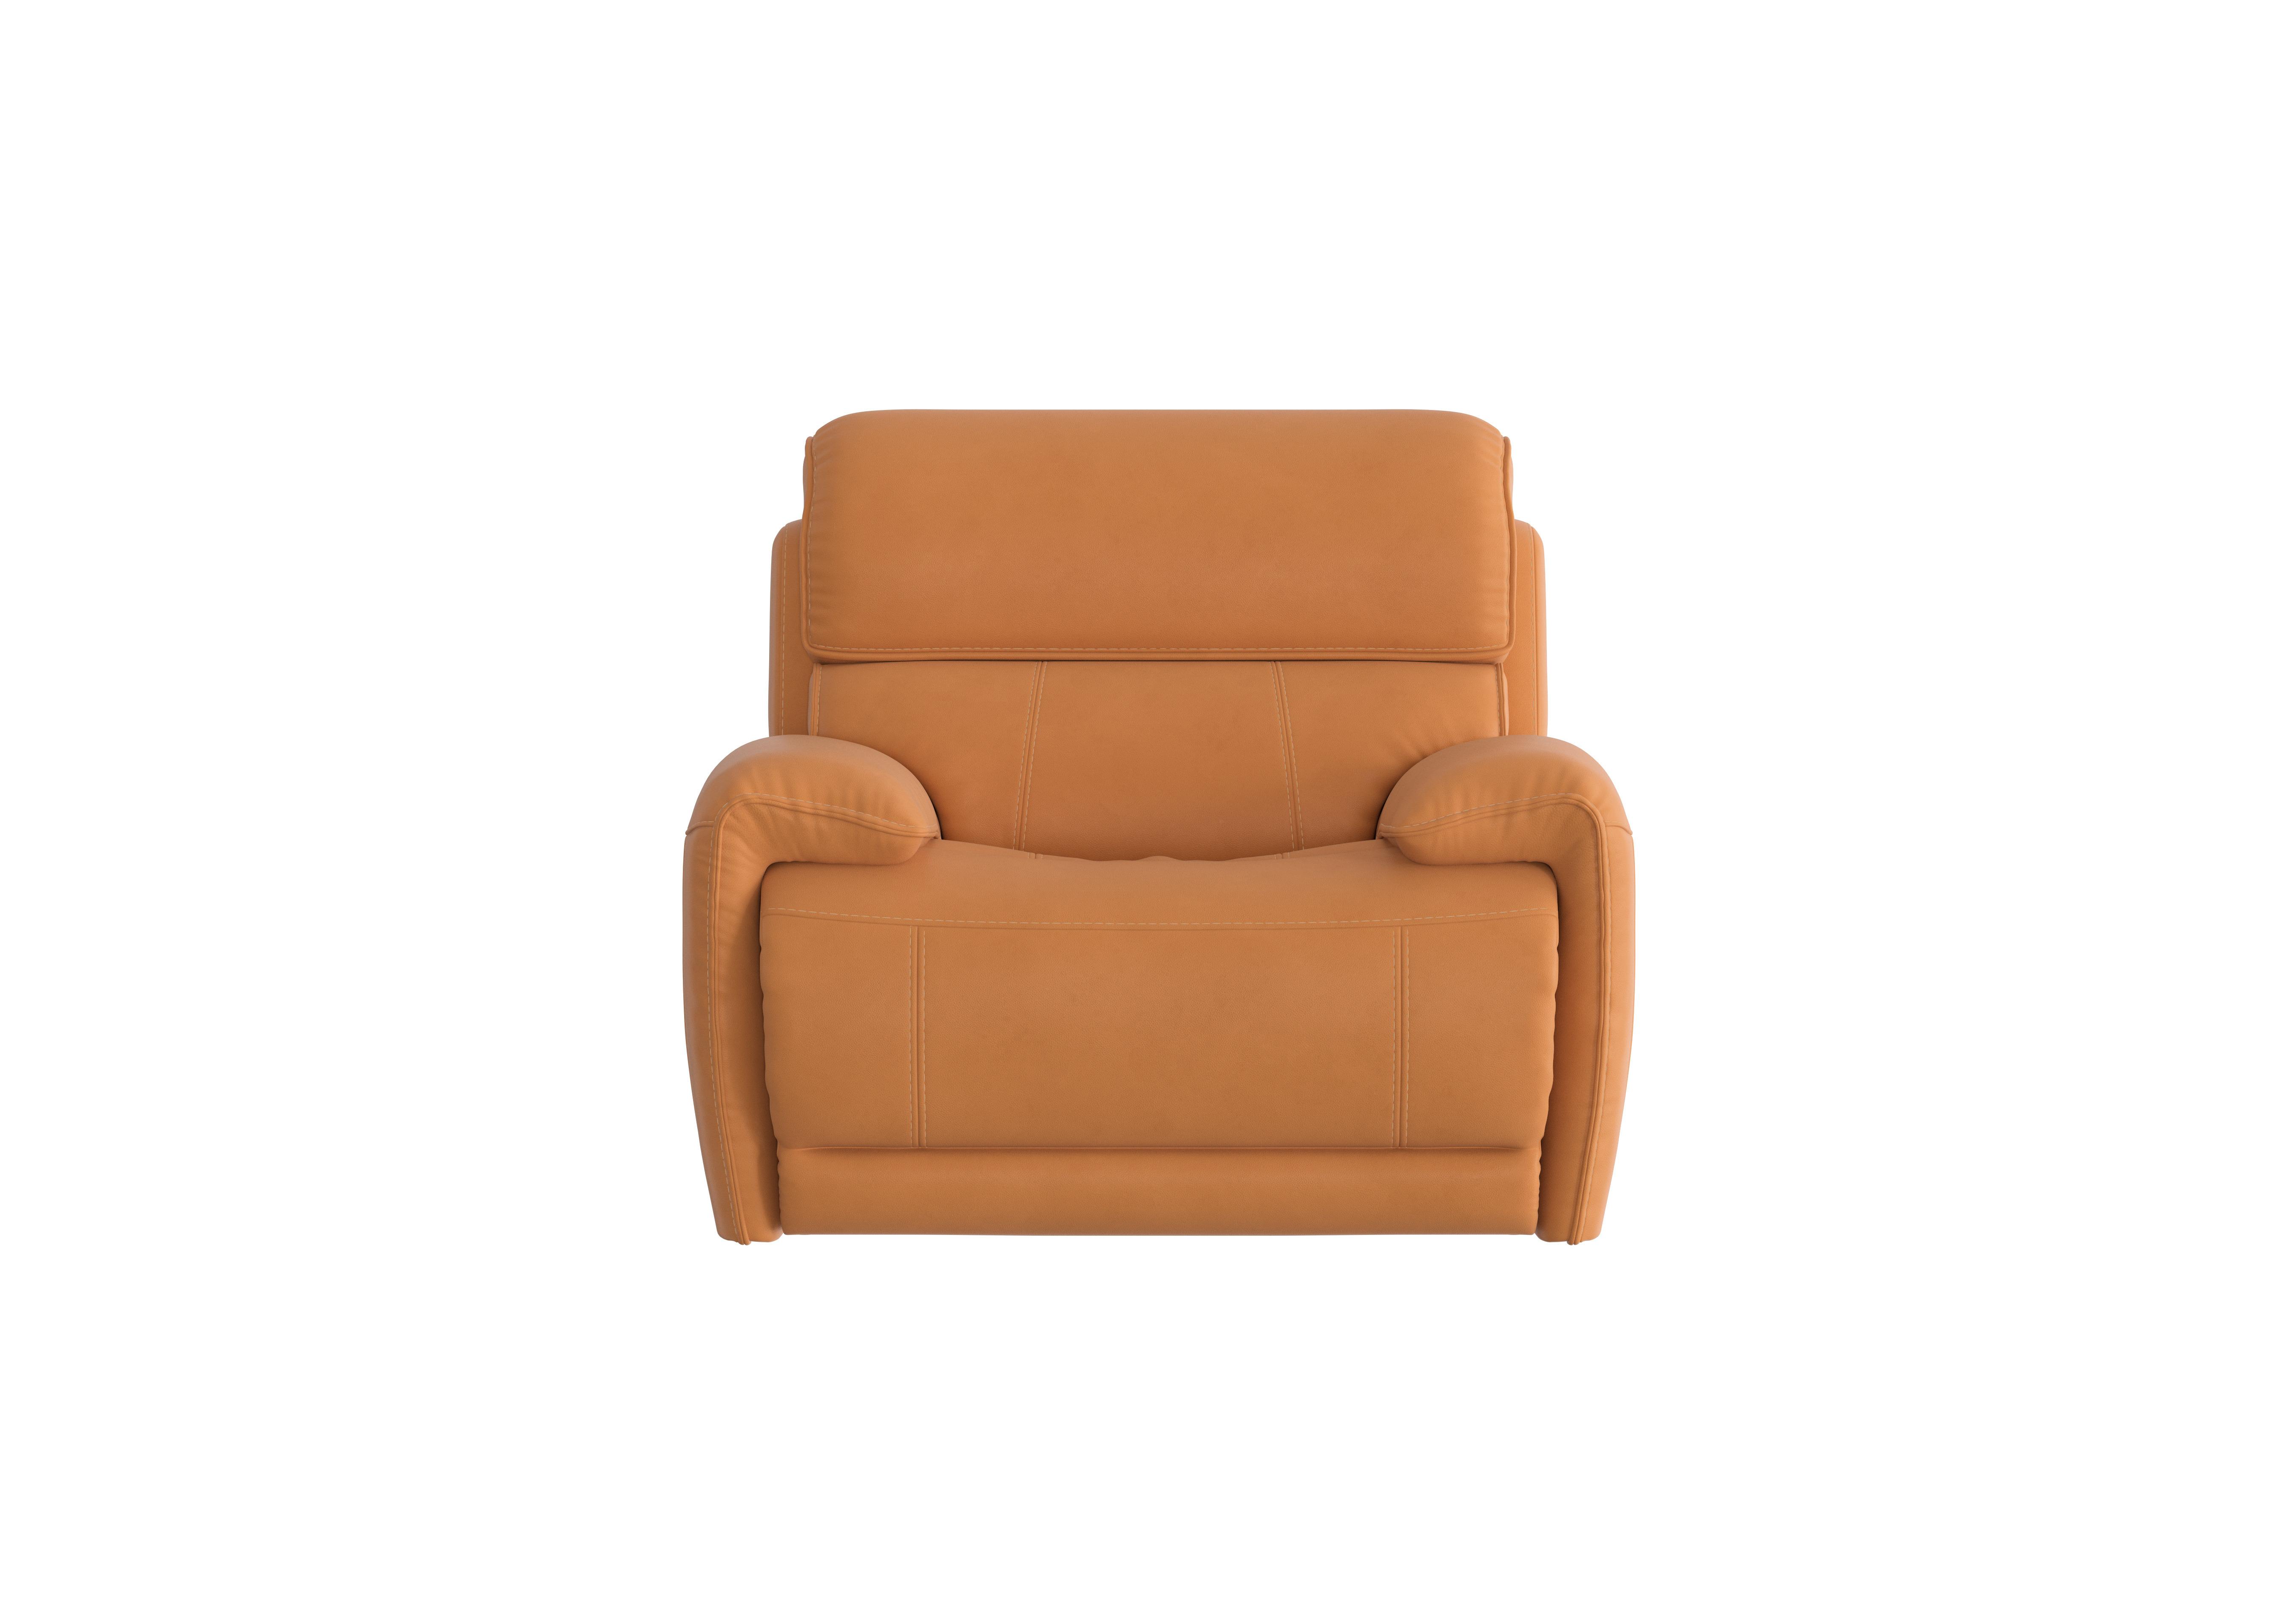 Link Leather Power Recliner Armchair with Power Headrest in Bv-335e Honey Yellow on Furniture Village